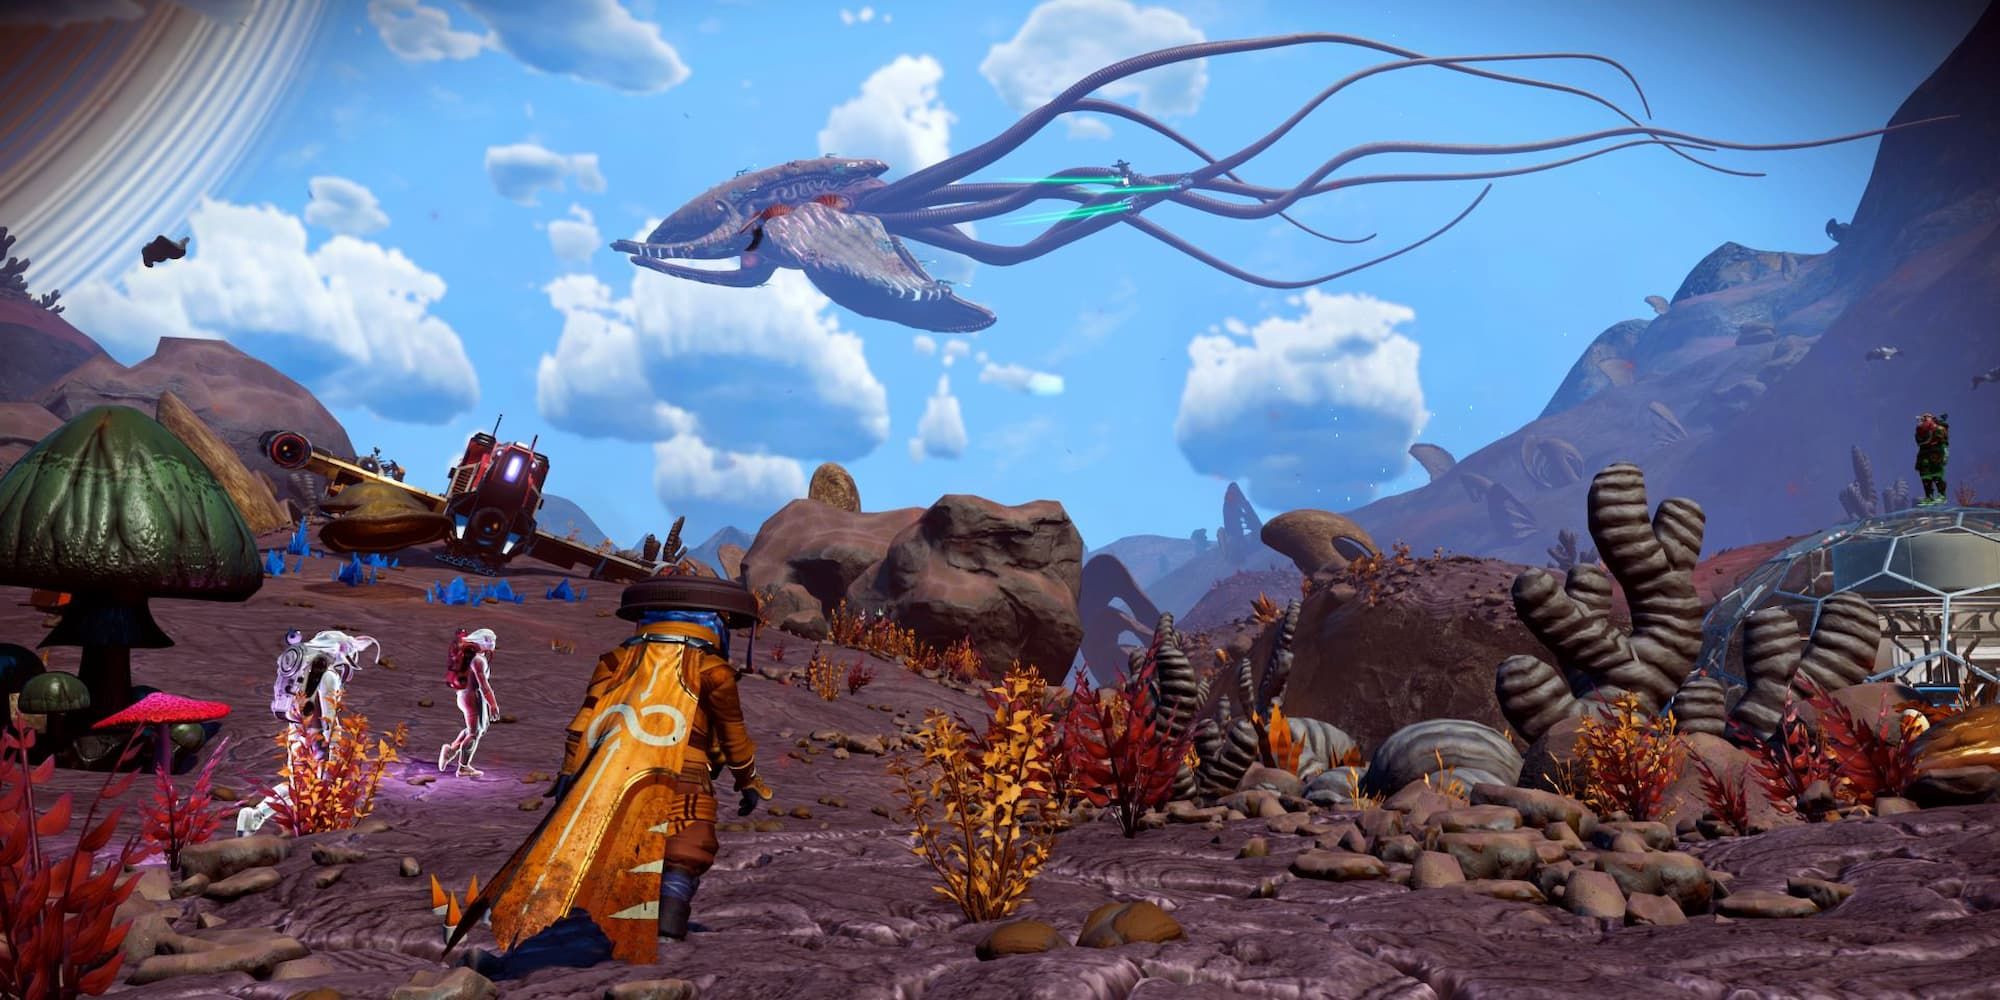 Space travelers look at a flying space creature from a planet's surface in No Man's Sky.